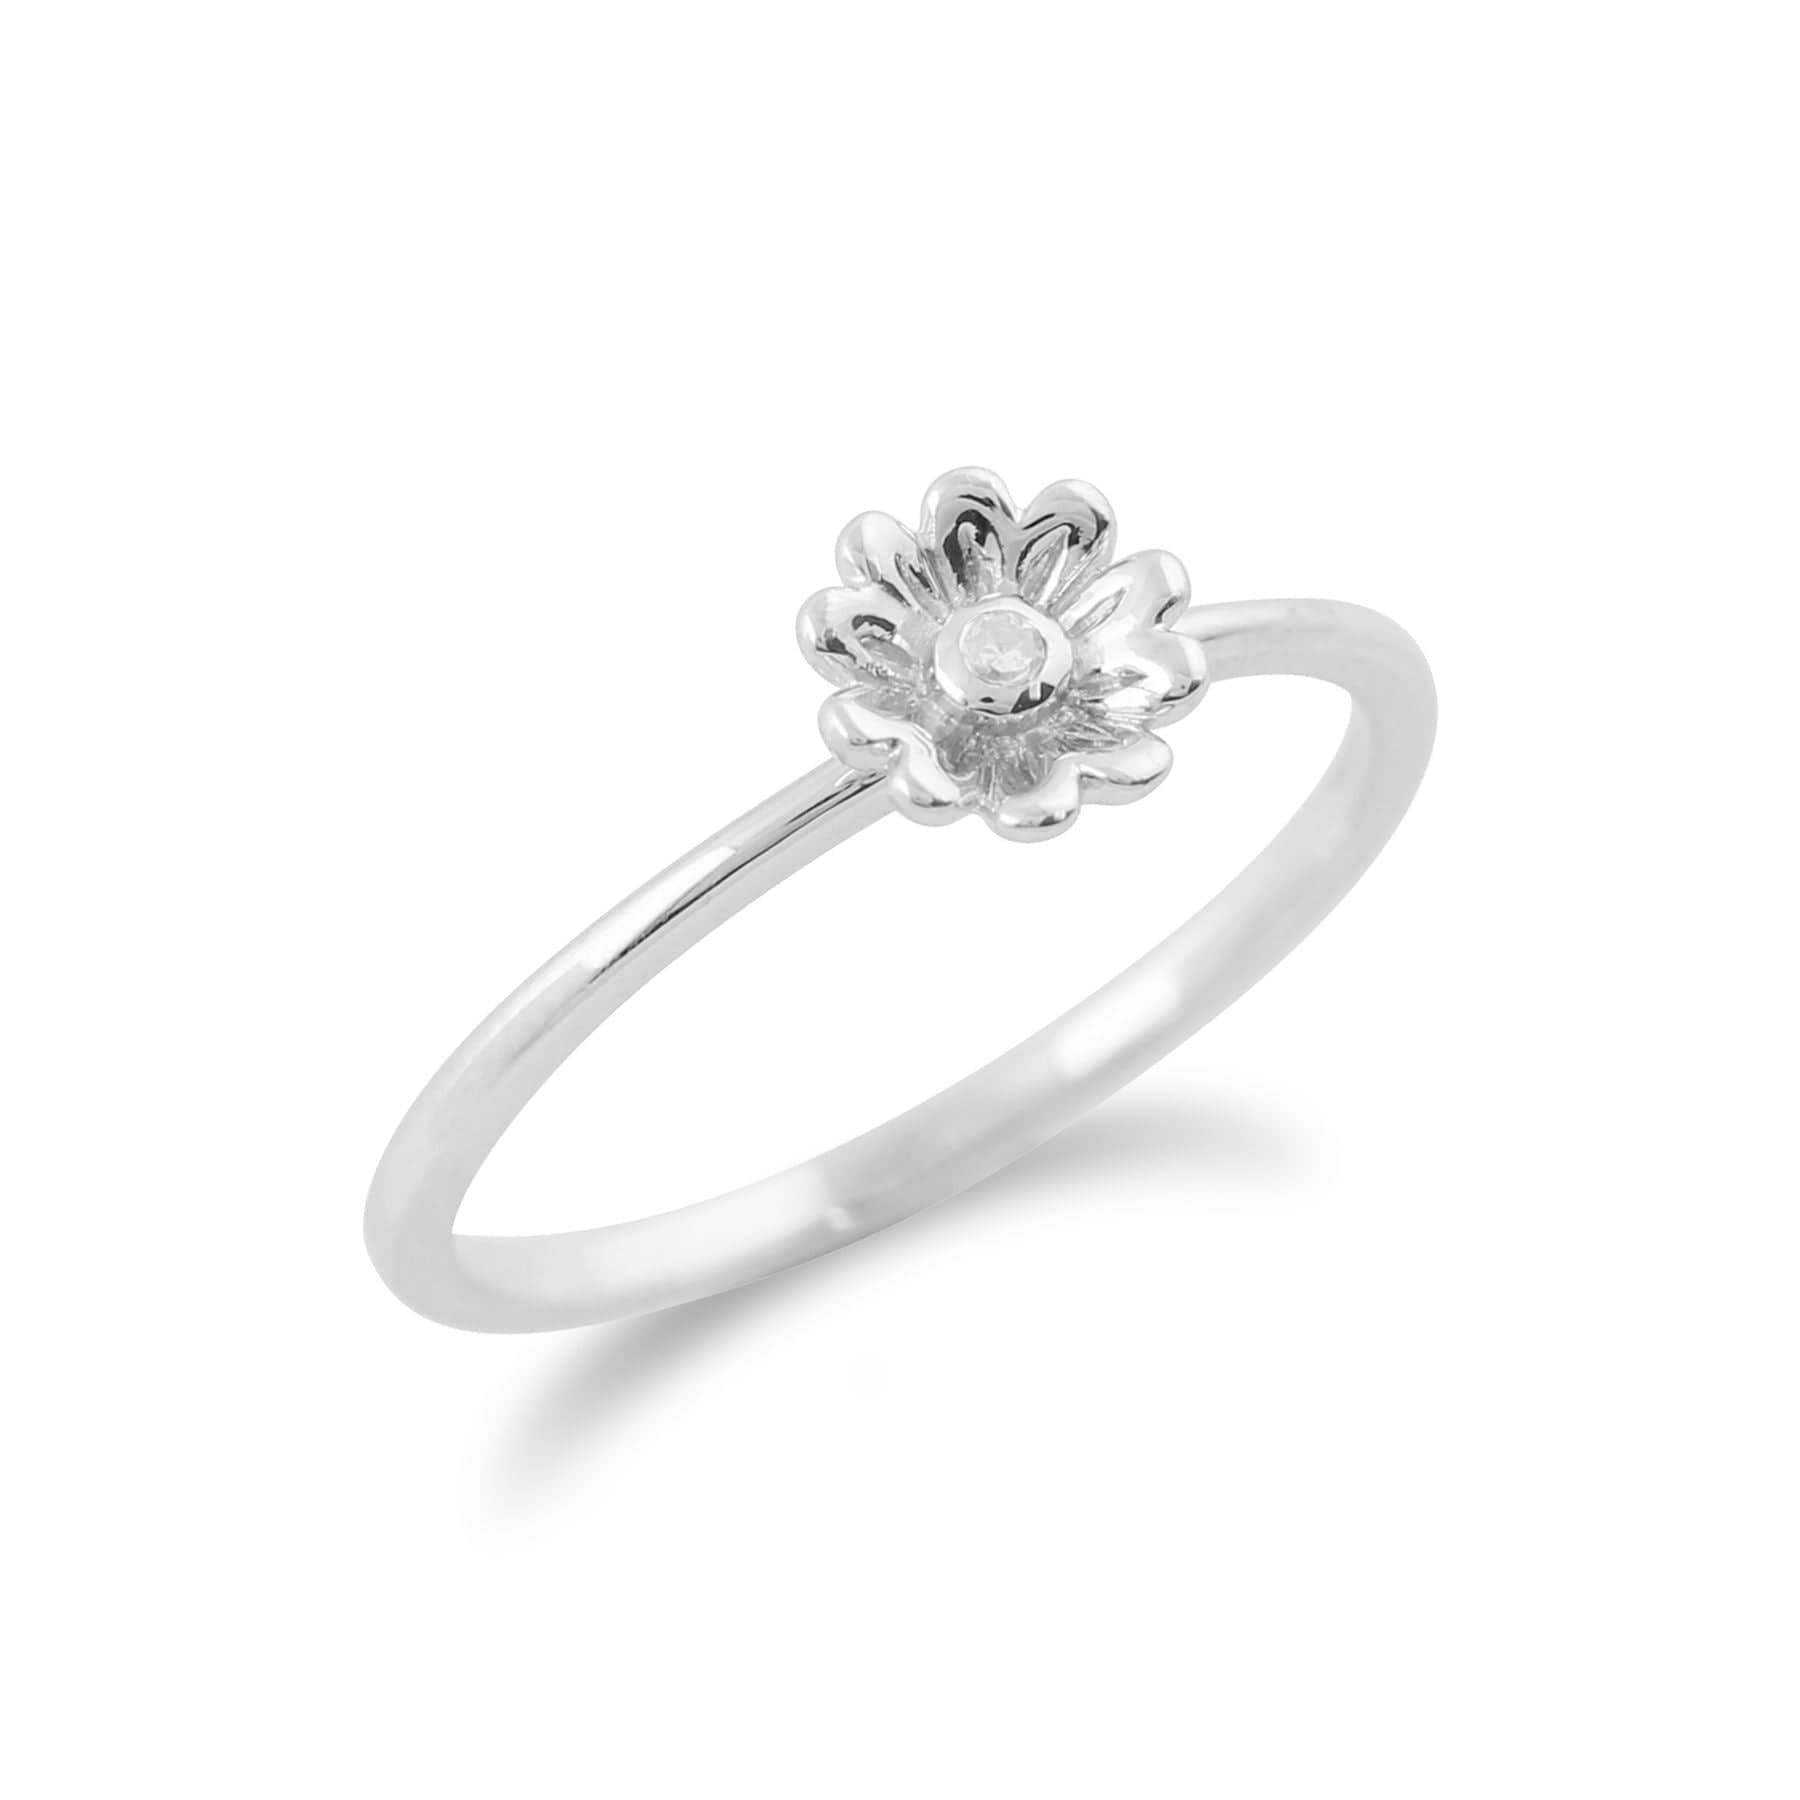 Gemondo 9ct White Gold 0.01ct Diamond Stackable Floral Ring